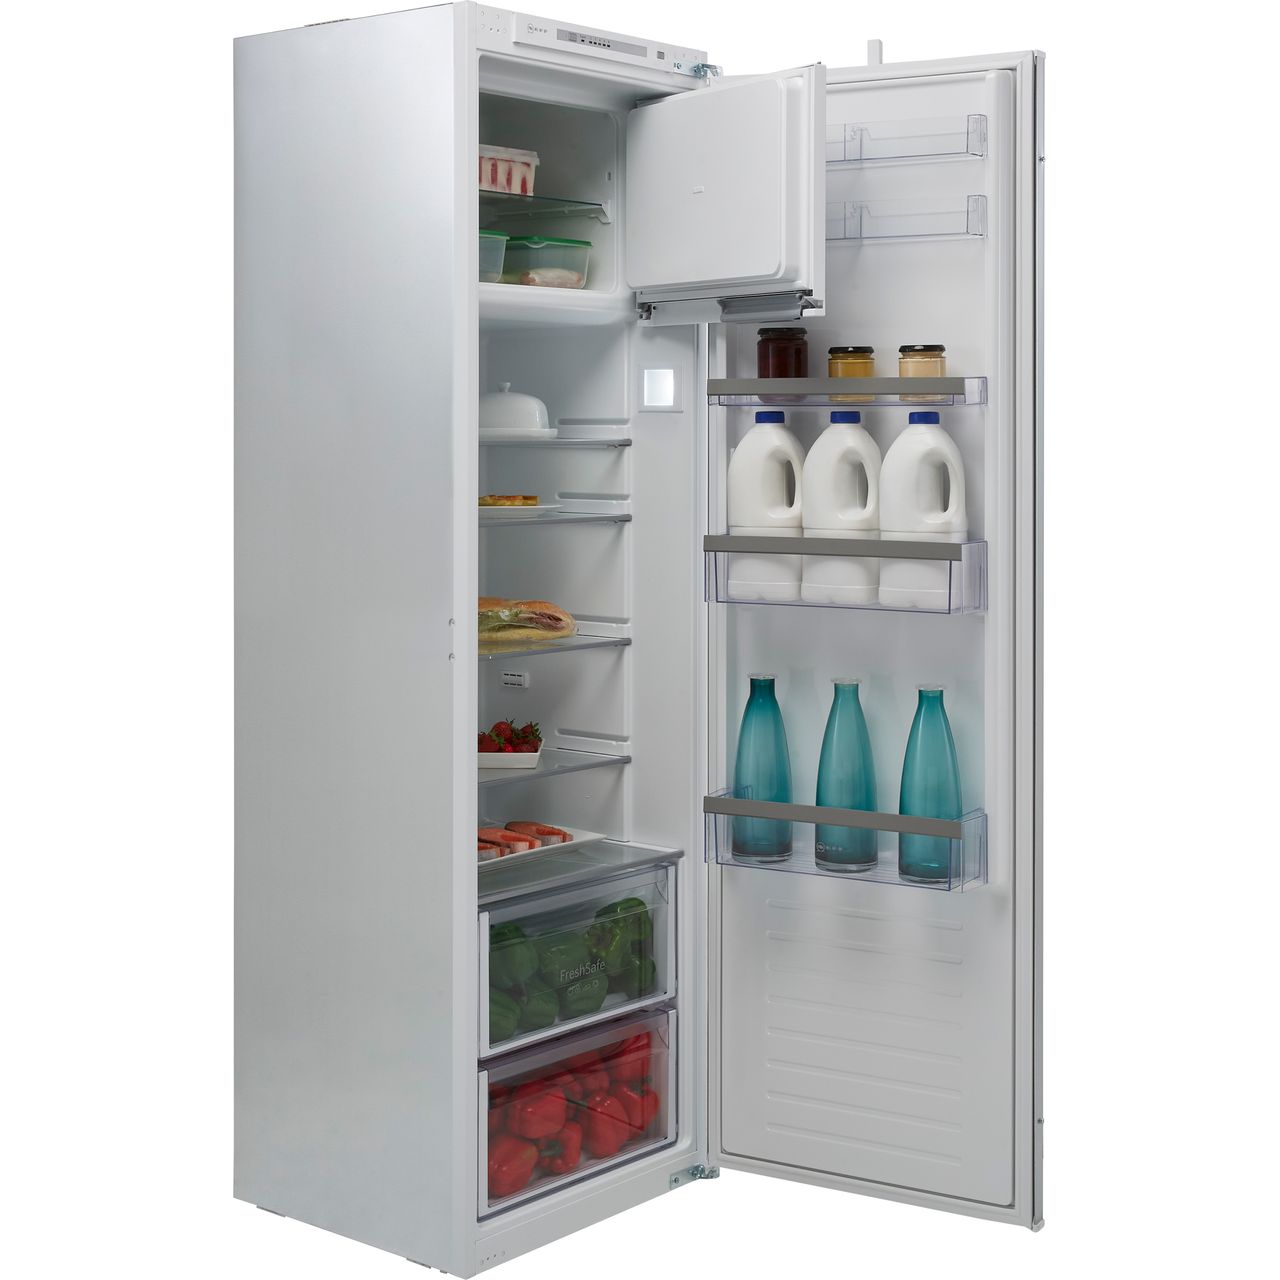 Best American-style fridge freezers for all budgets